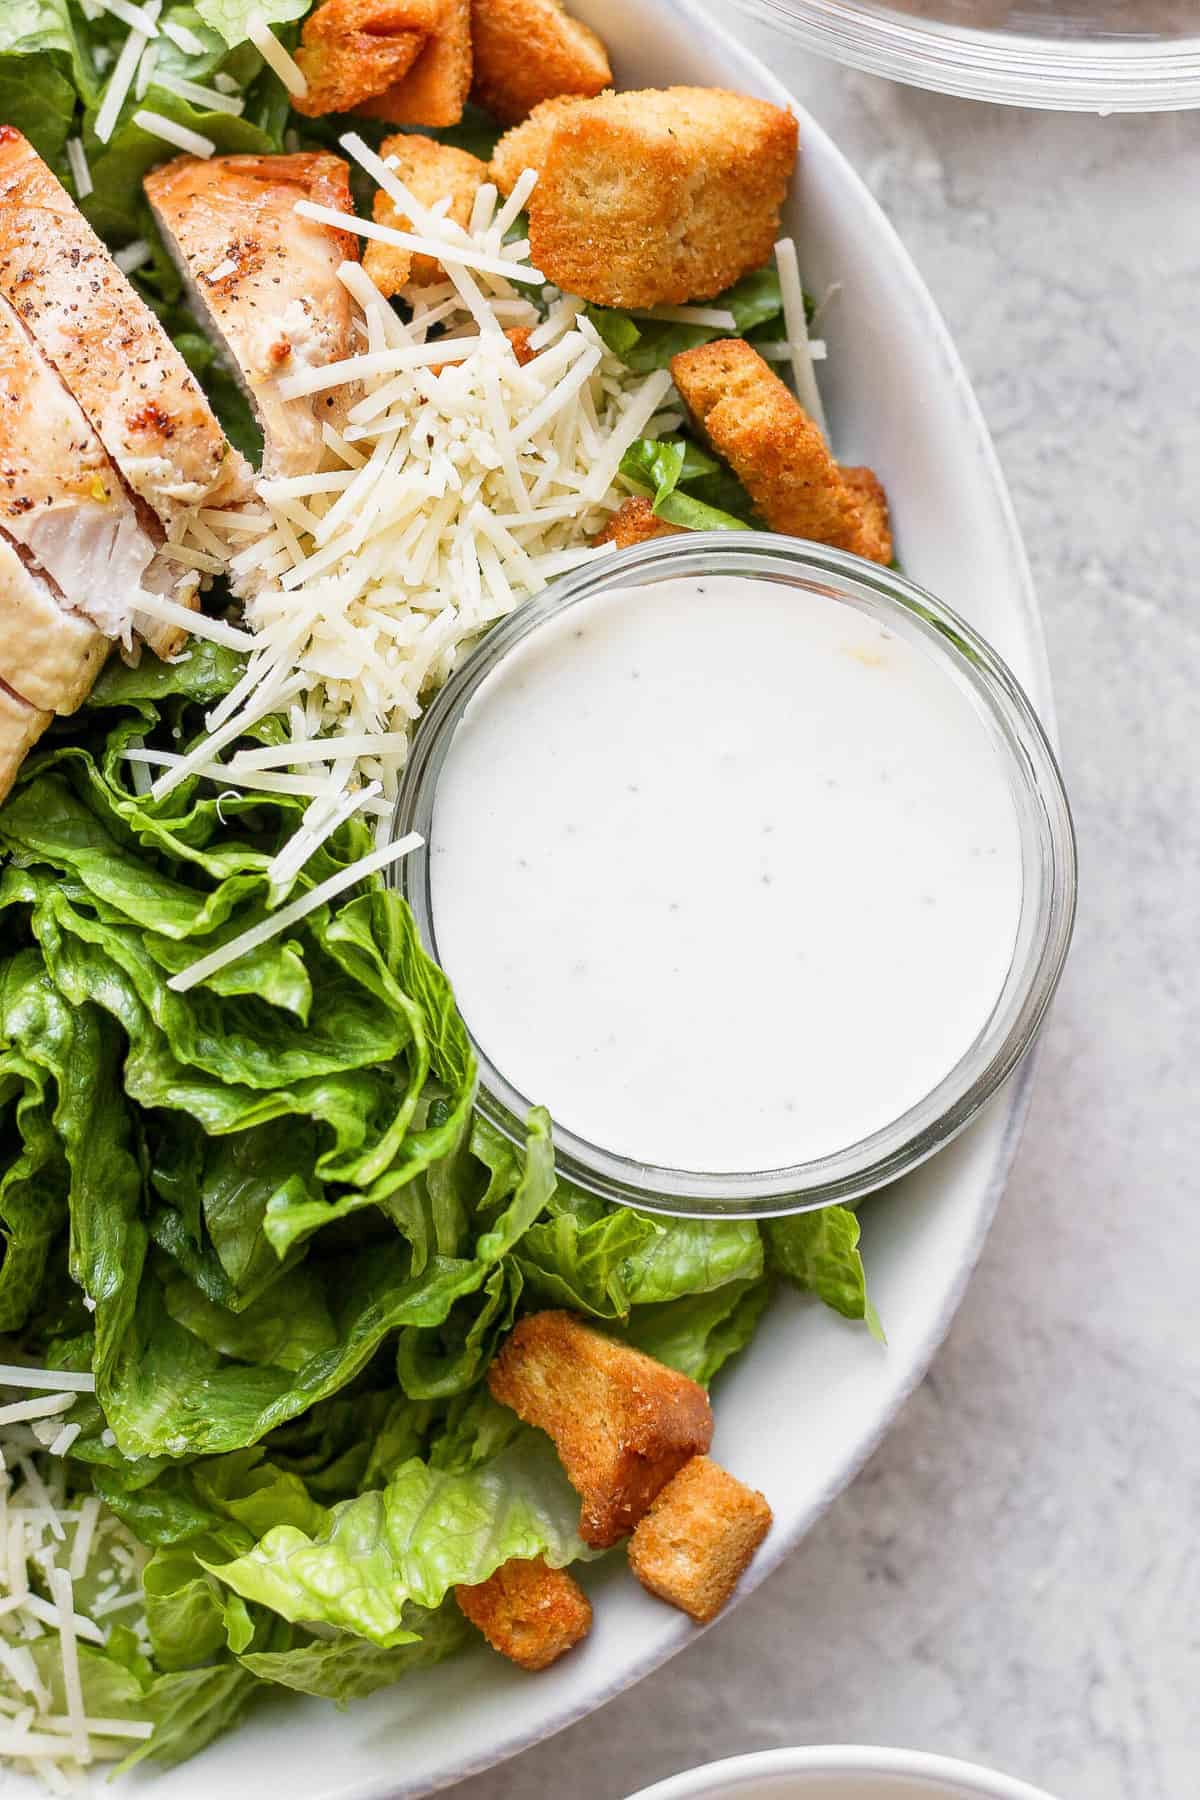 to Go Salad Dressing Container | Crate & Barrel